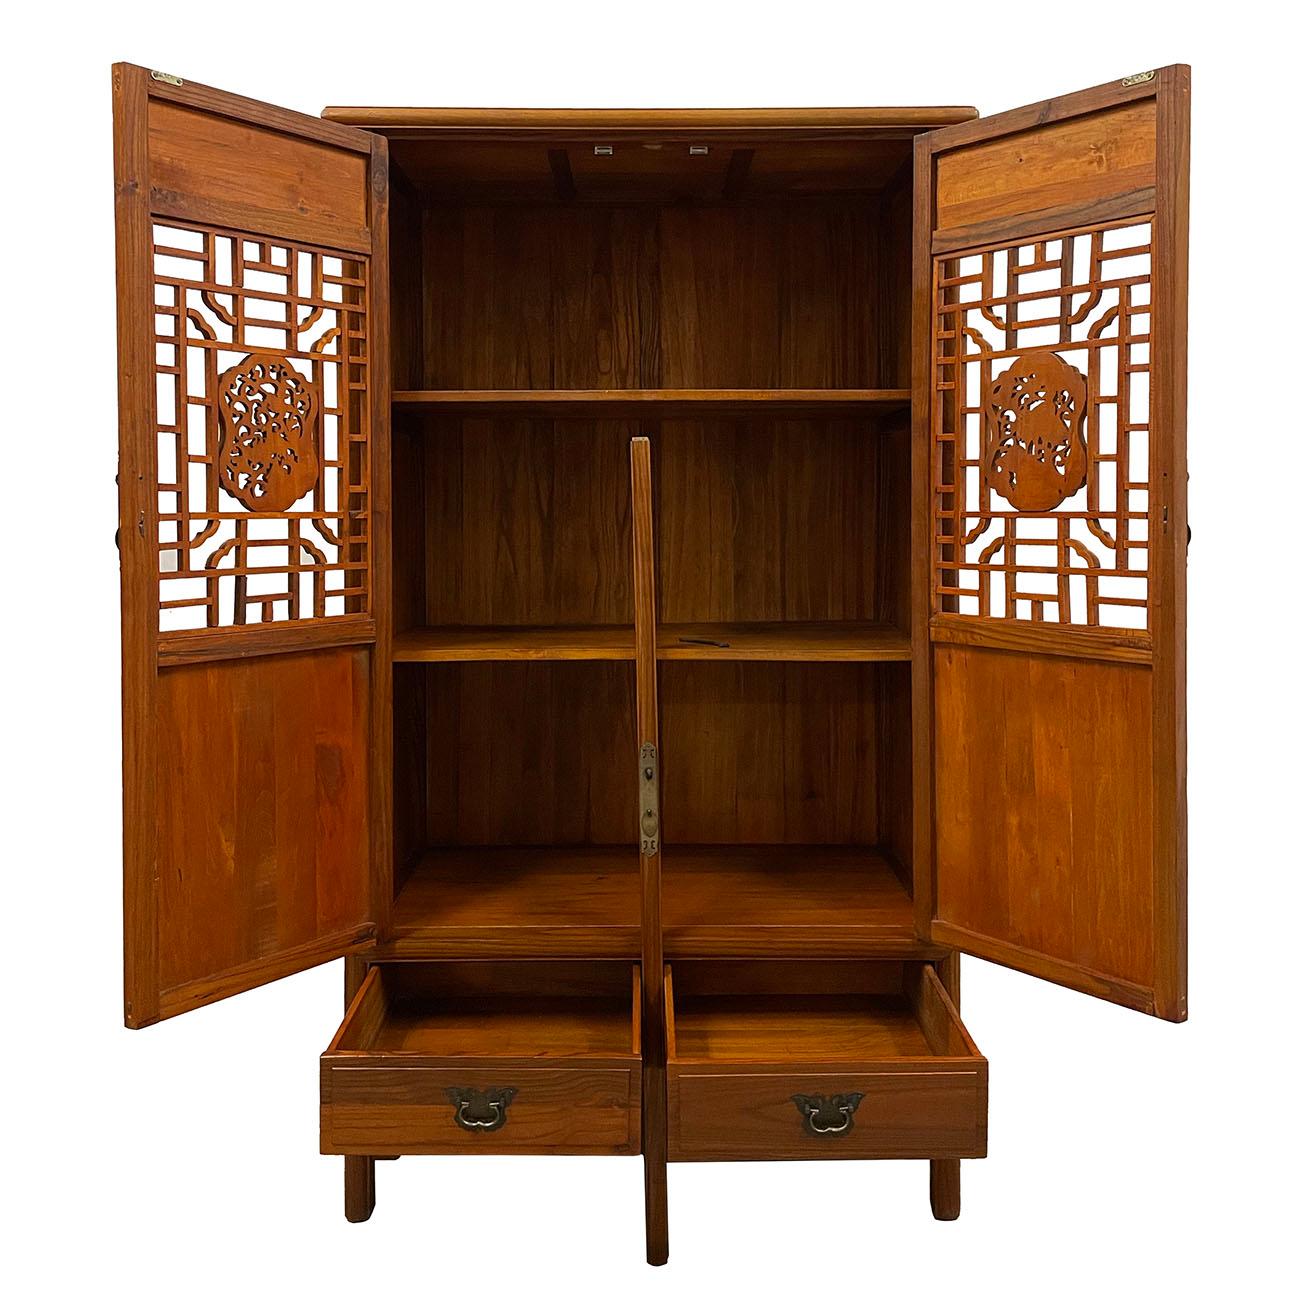 Chinese Export Vintage Chinese Carved Wooden Cabinet, Armoire, Wardrobe